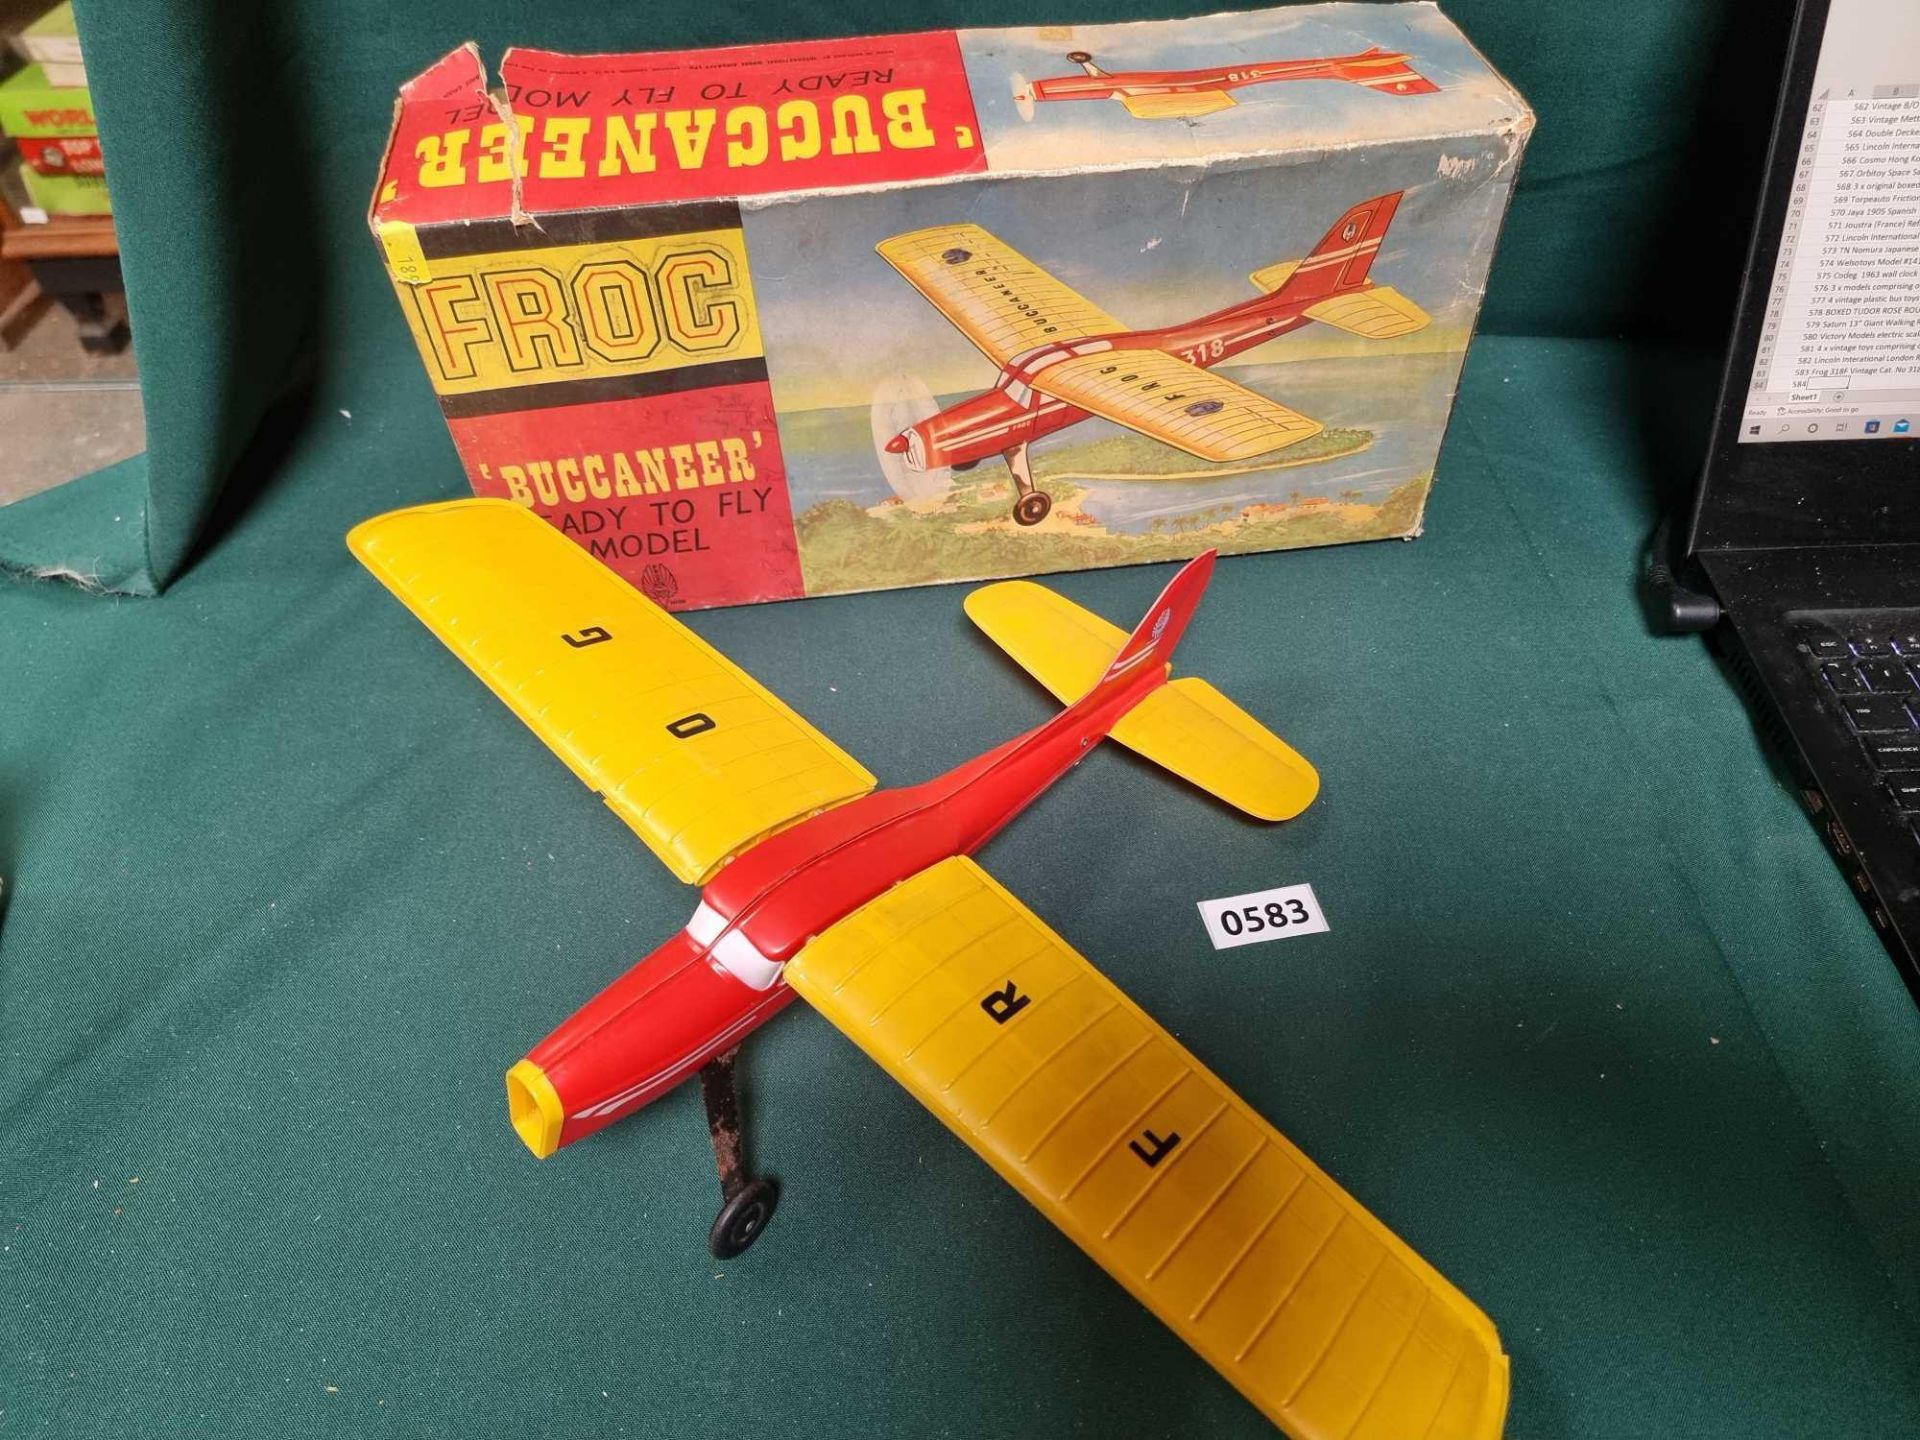 Frog 318F Vintage Cat. No 318F Buccaneer Ready To Fly Model Of Tough Plastic Construction. High